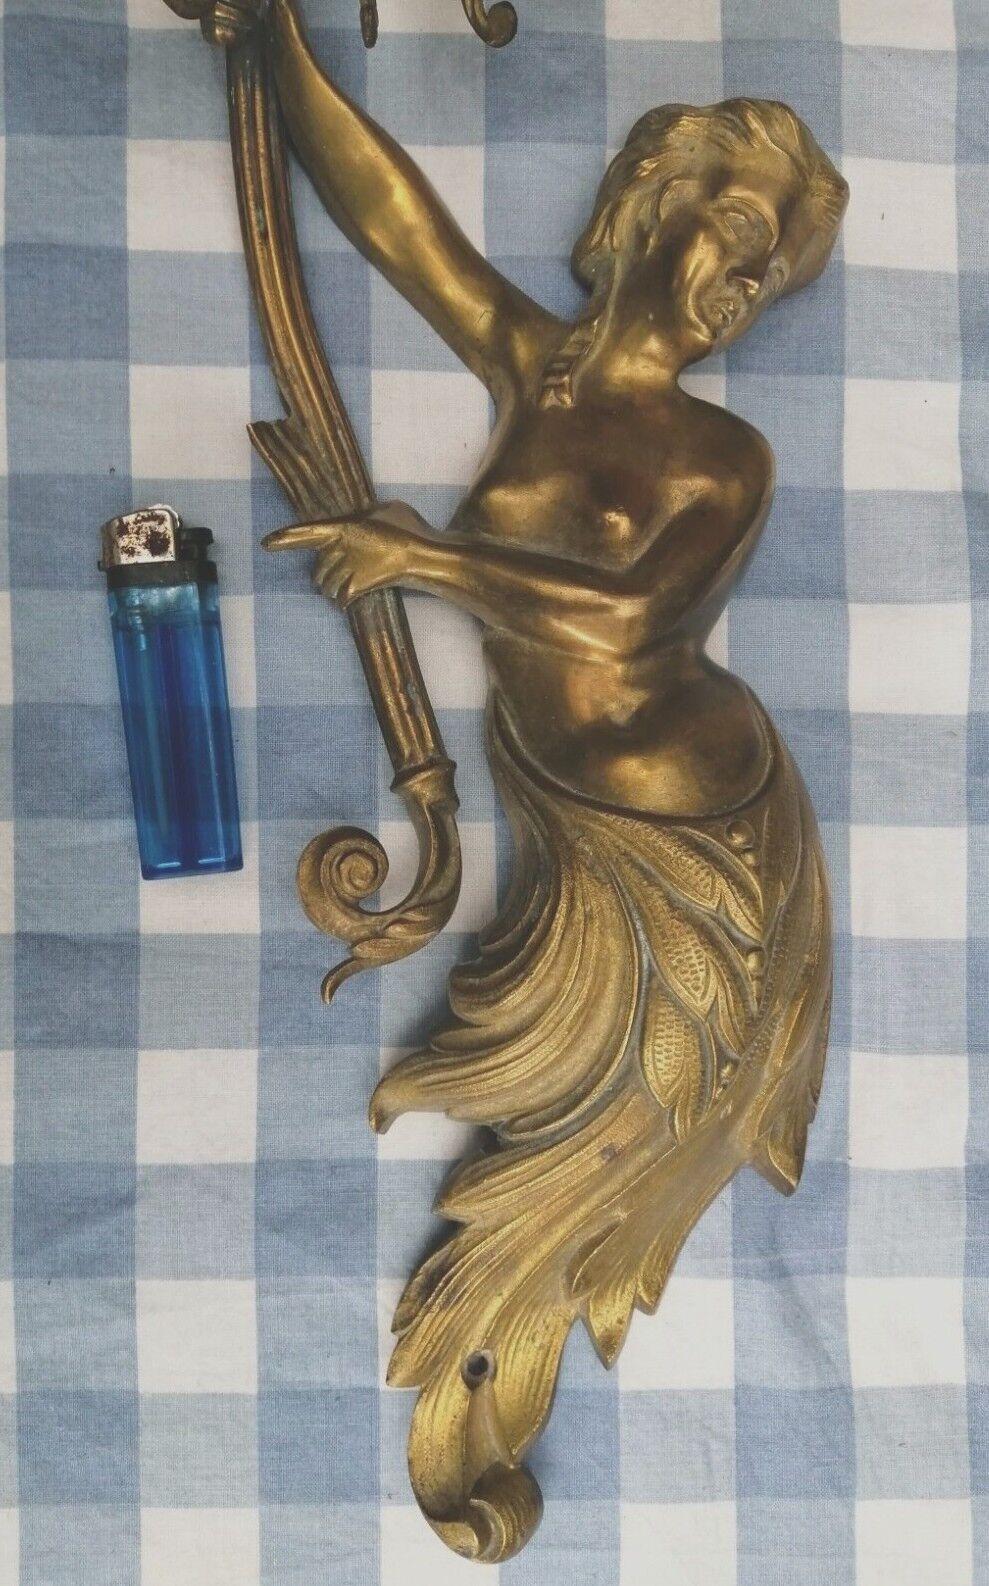 1920s French Art Deco Bronze Mermaid Wi/ Sea Serpents Wall Sconce after Guillema In Good Condition For Sale In Opa Locka, FL